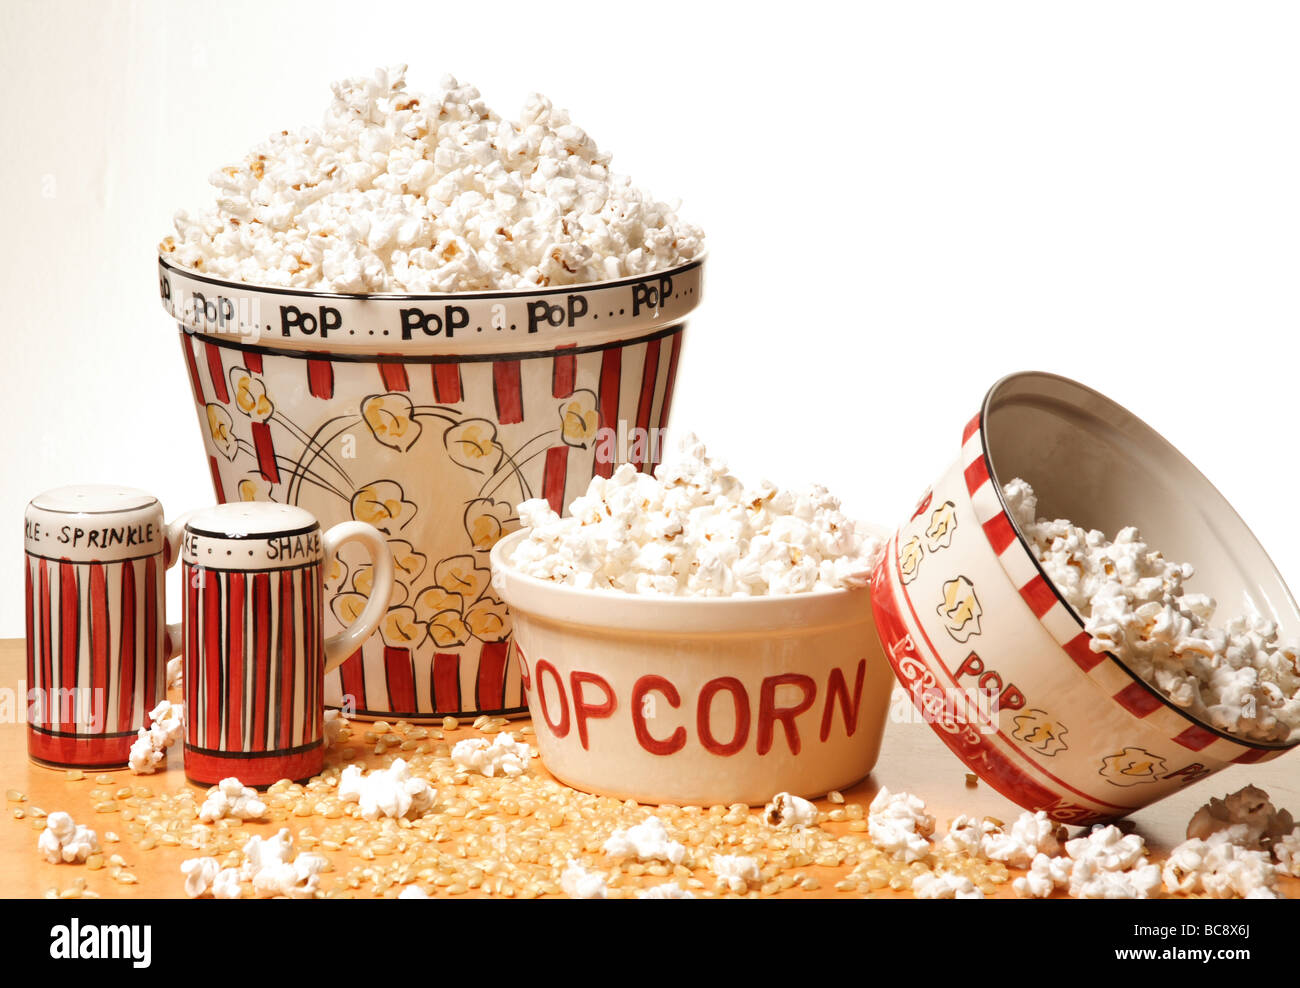 https://c8.alamy.com/comp/BC8X6J/popcorn-or-popping-corn-is-a-type-of-corn-which-explodes-from-the-BC8X6J.jpg